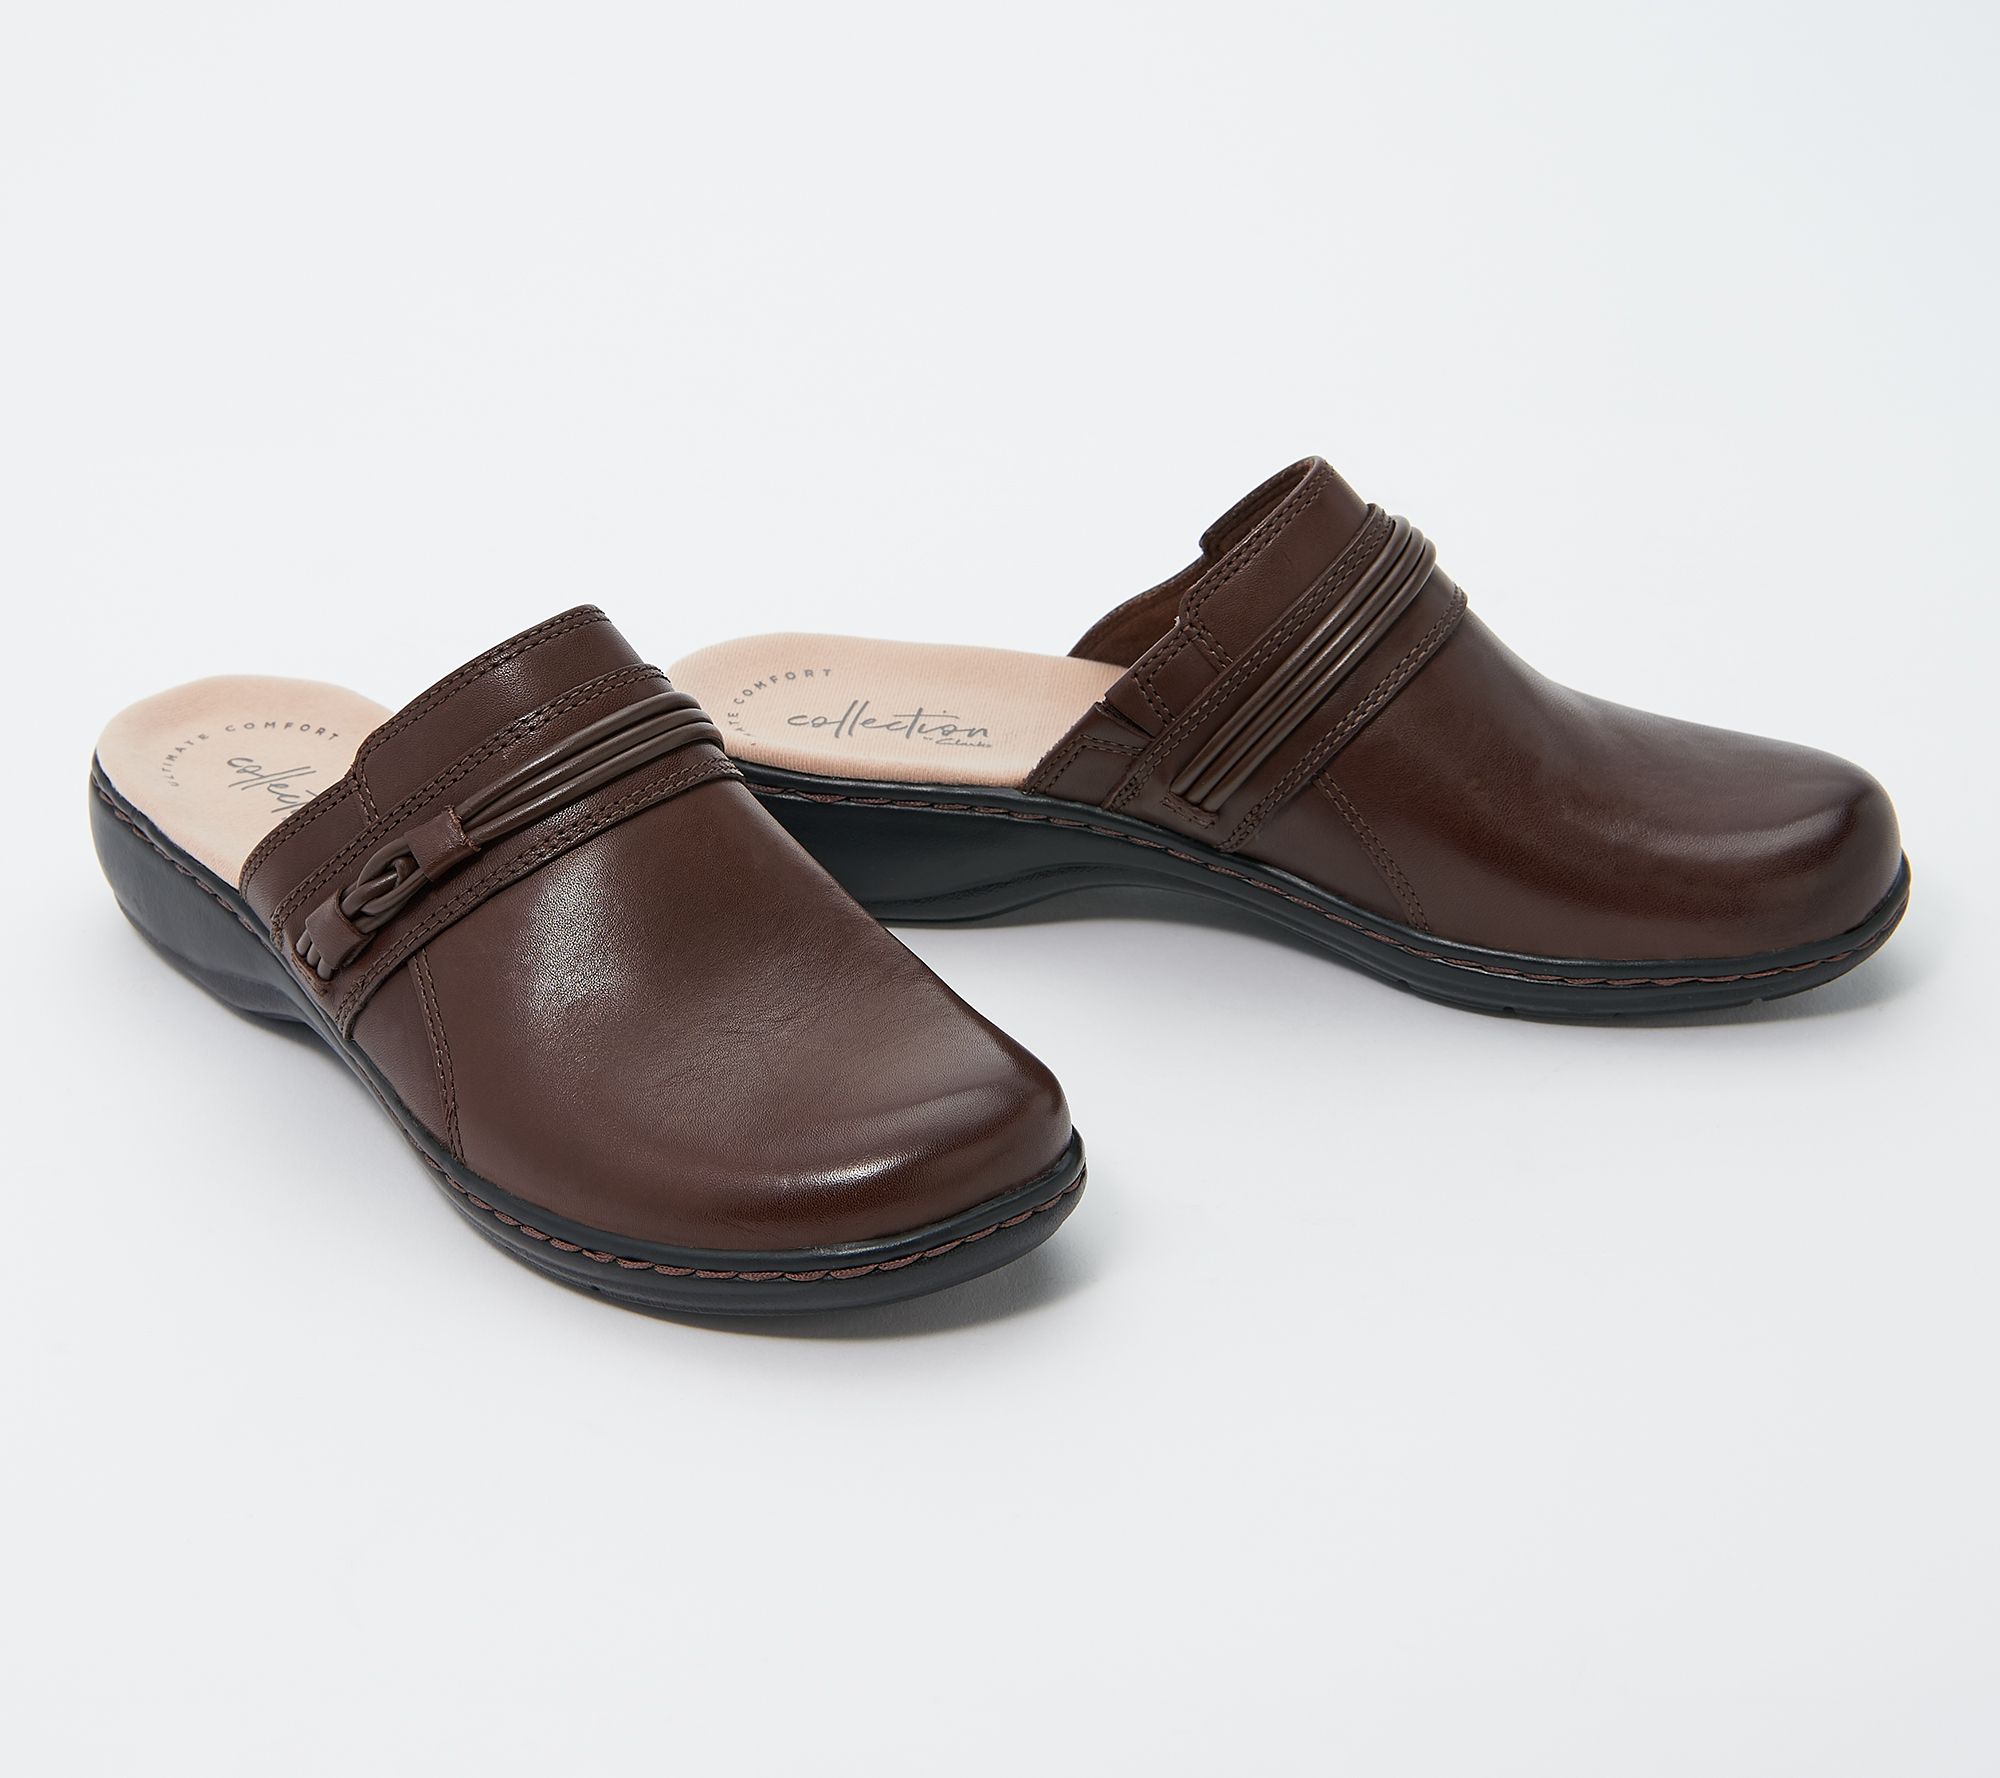 Clarks Collection Leather Clogs Leisa Clover -